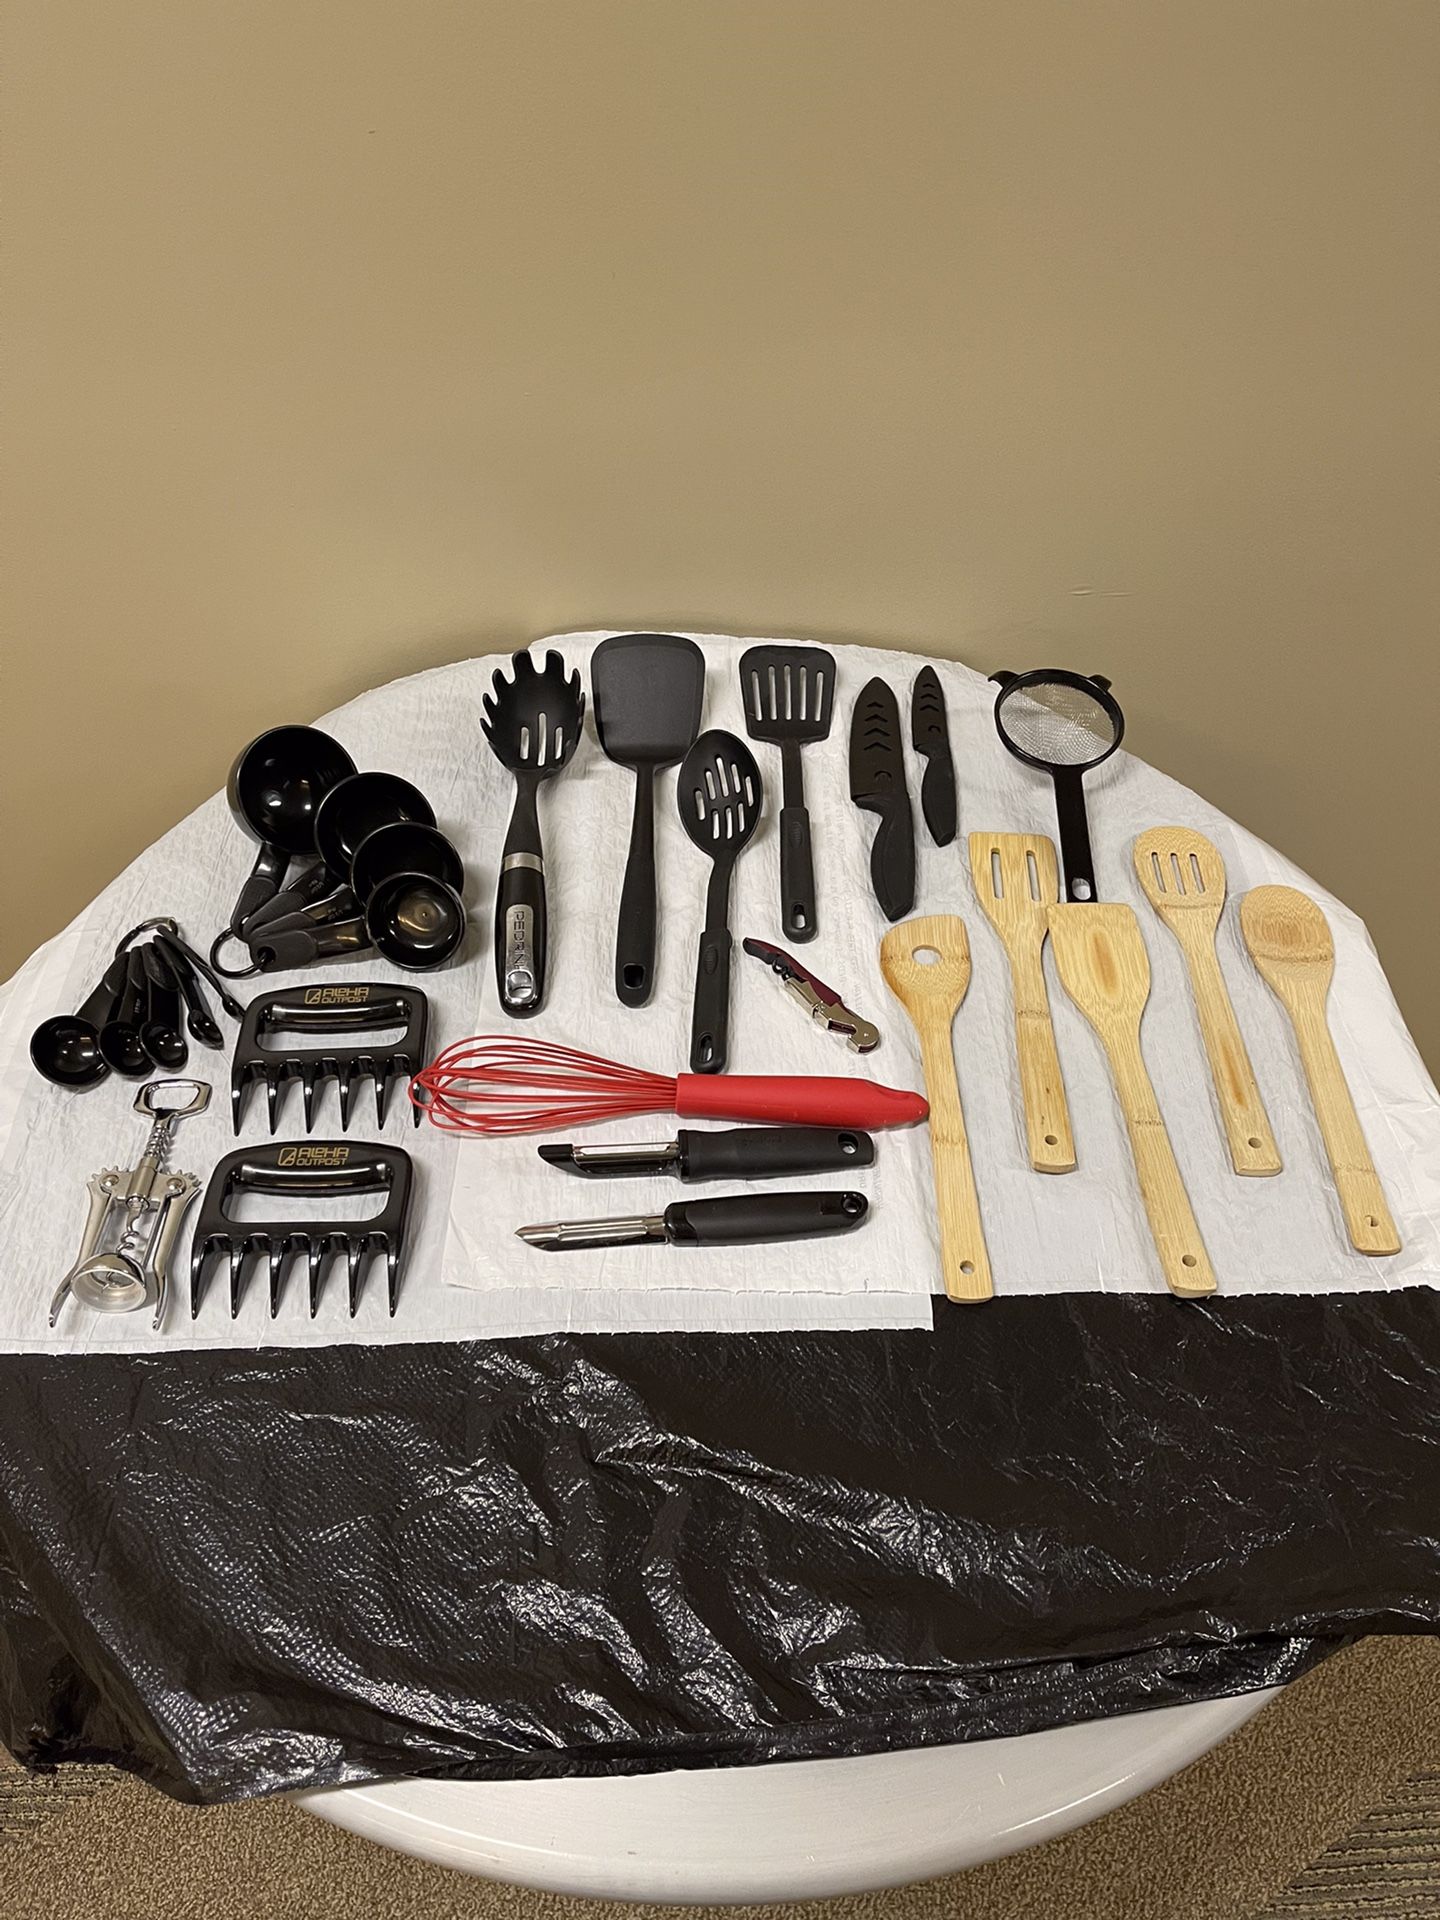 KITCHEN ACCESSORIES Bundle - all LIKE-NEW!! - firm price